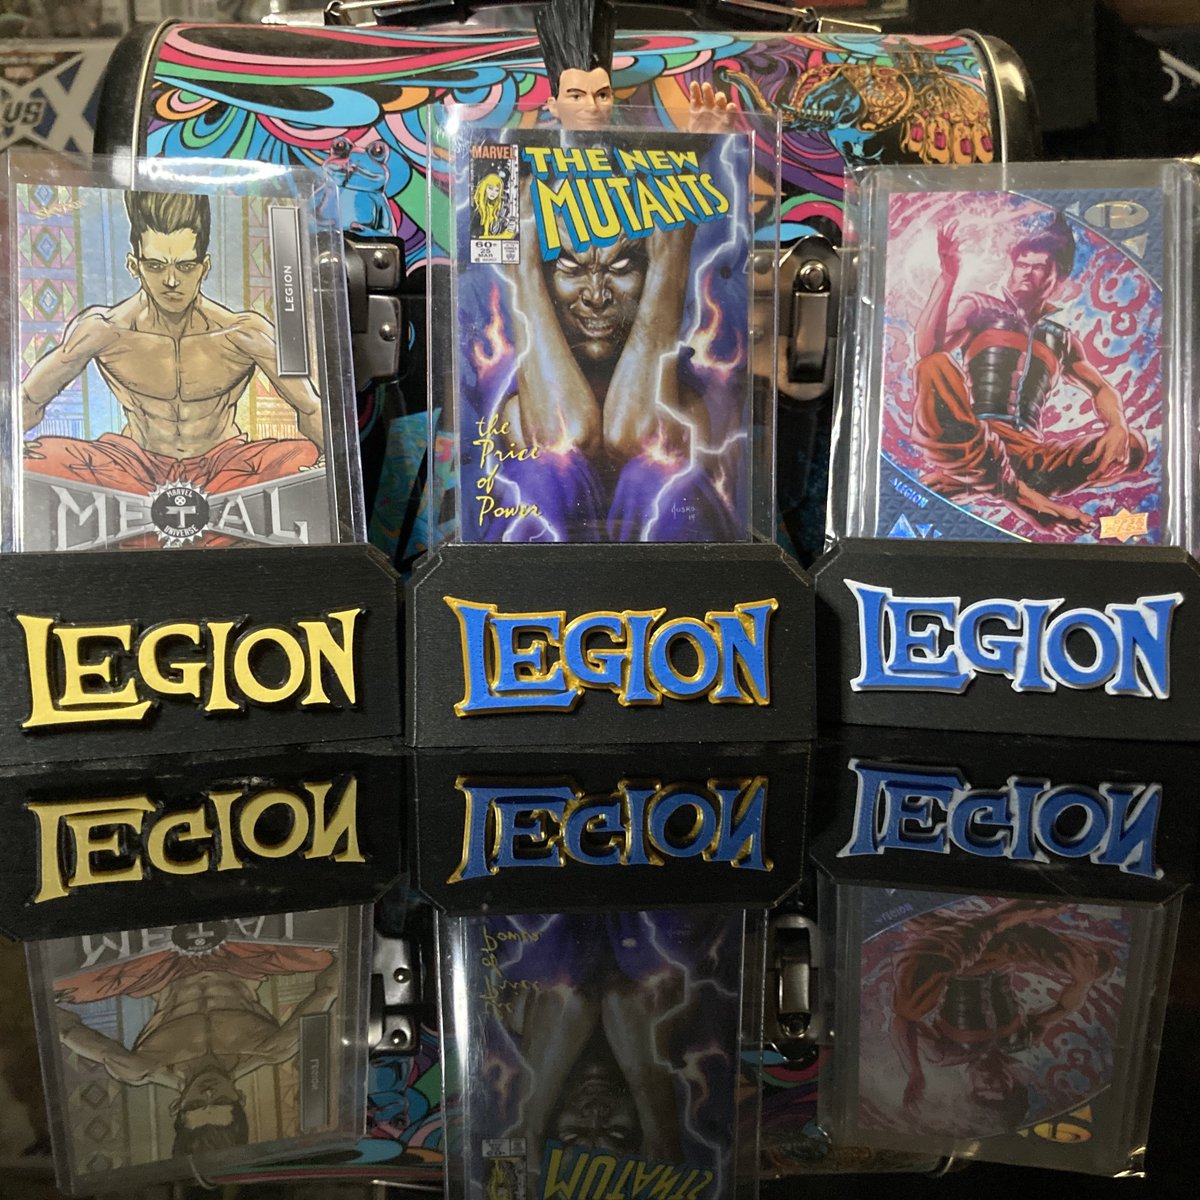 Thank you so much @WHAMstand for sending over these custom Legion card stands they are bloody perfect!